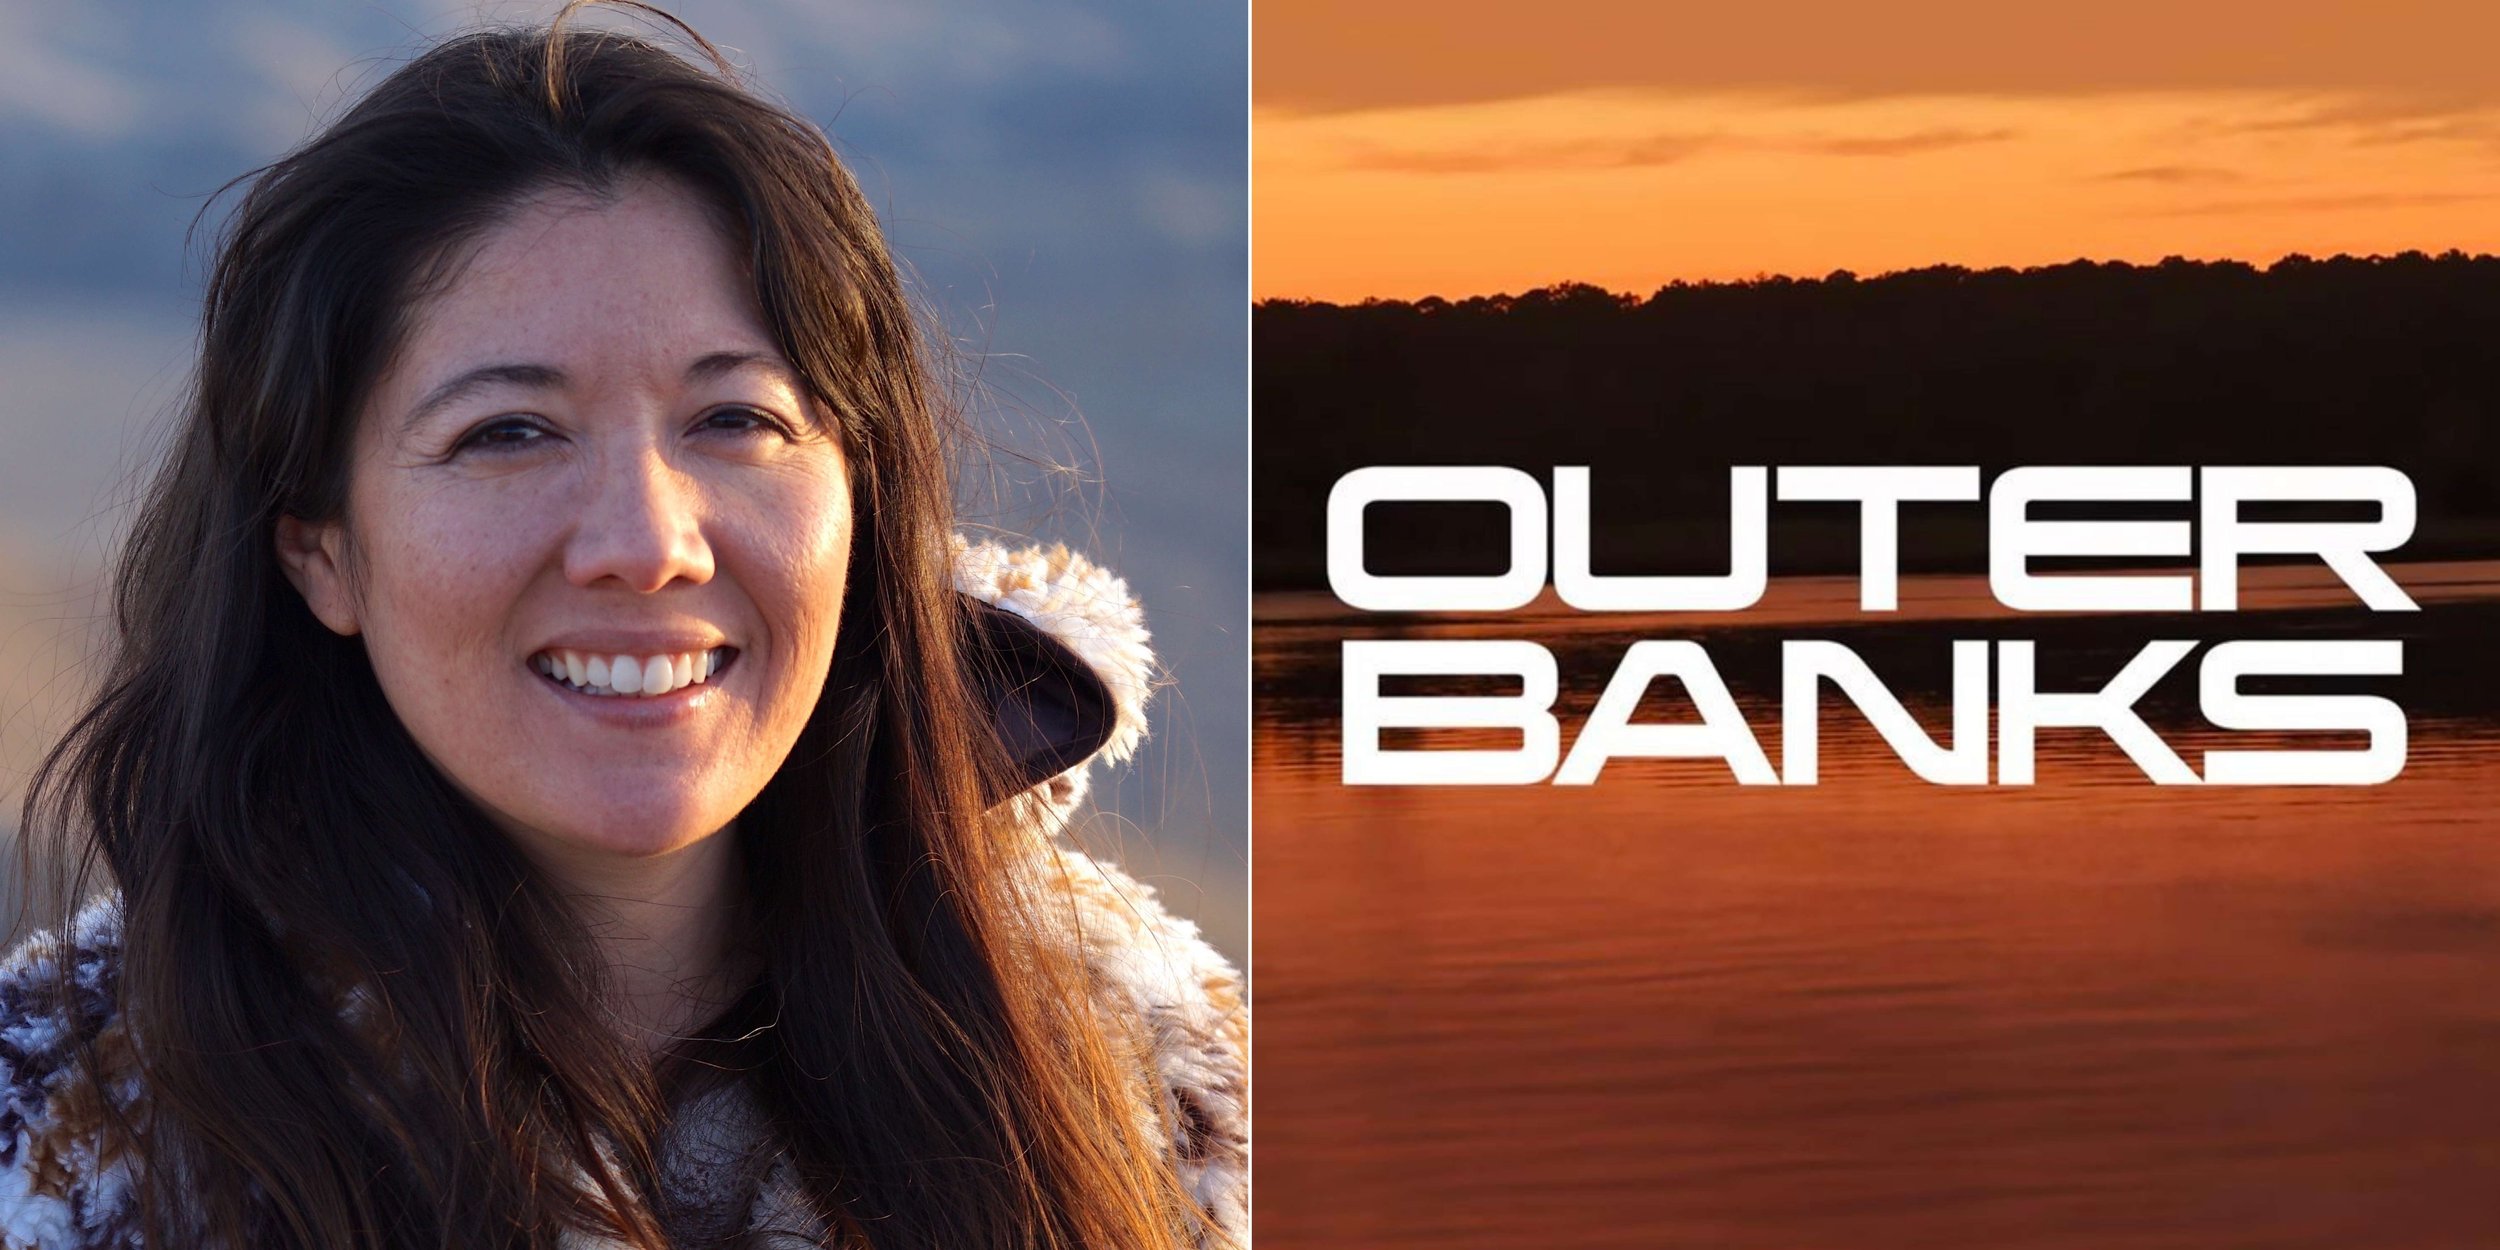  Catherine Oyster was hired as a Script Coordinator on  Outer Banks .  